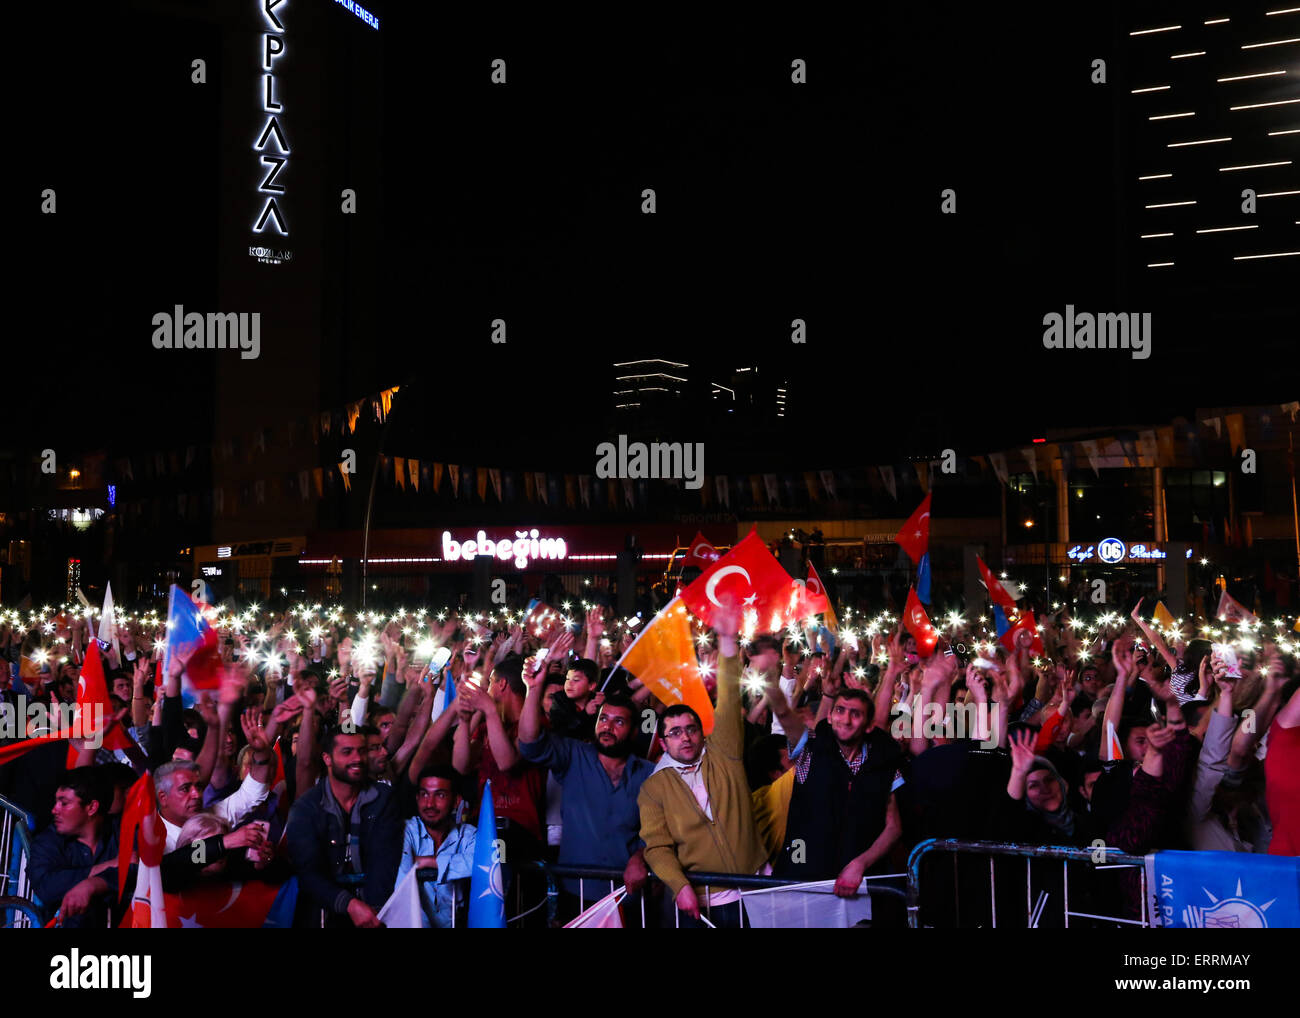 Ankara, Turkey. 7th June, 2015. The ruling Justice and Development Party (AKP) supporters celebrate over the election results in Ankara, capital of Turkey, June 7, 2015. The loss of majority in the parliament by the ruling Justice and Development Party (AKP) has paved the way for either a coalition government or an interim minority government that is slated to take the nation to an early election, analysts said on Sunday. © Zou Le/Xinhua/Alamy Live News Stock Photo